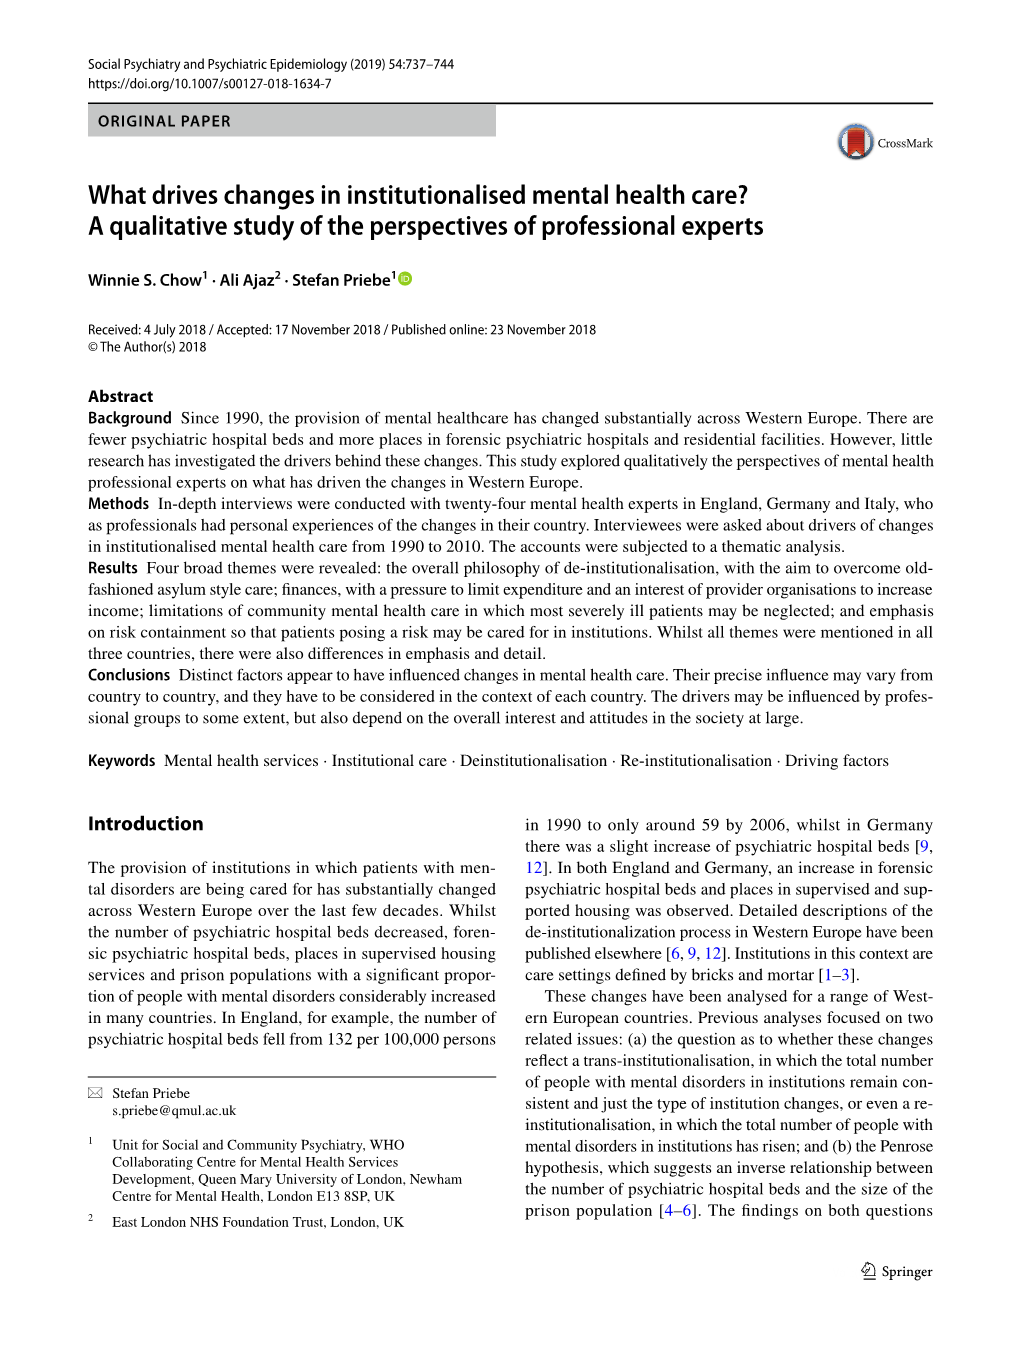 What Drives Changes in Institutionalised Mental Health Care? a Qualitative Study of the Perspectives of Professional Experts